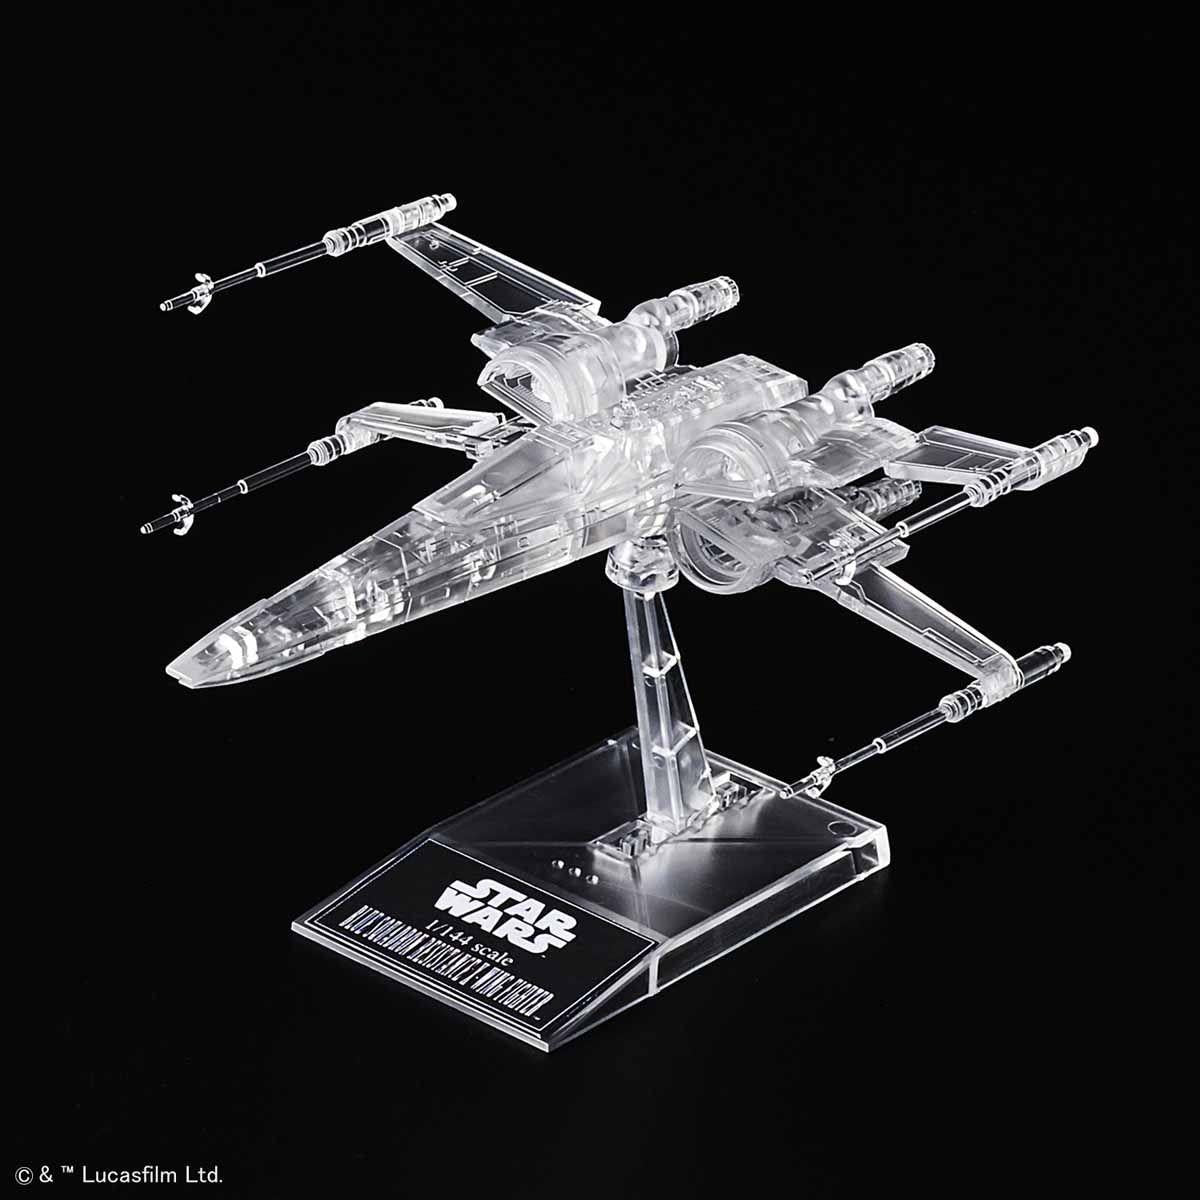 Star Wars: The Last Jedi Clear Vehicle Set Various Scale Model